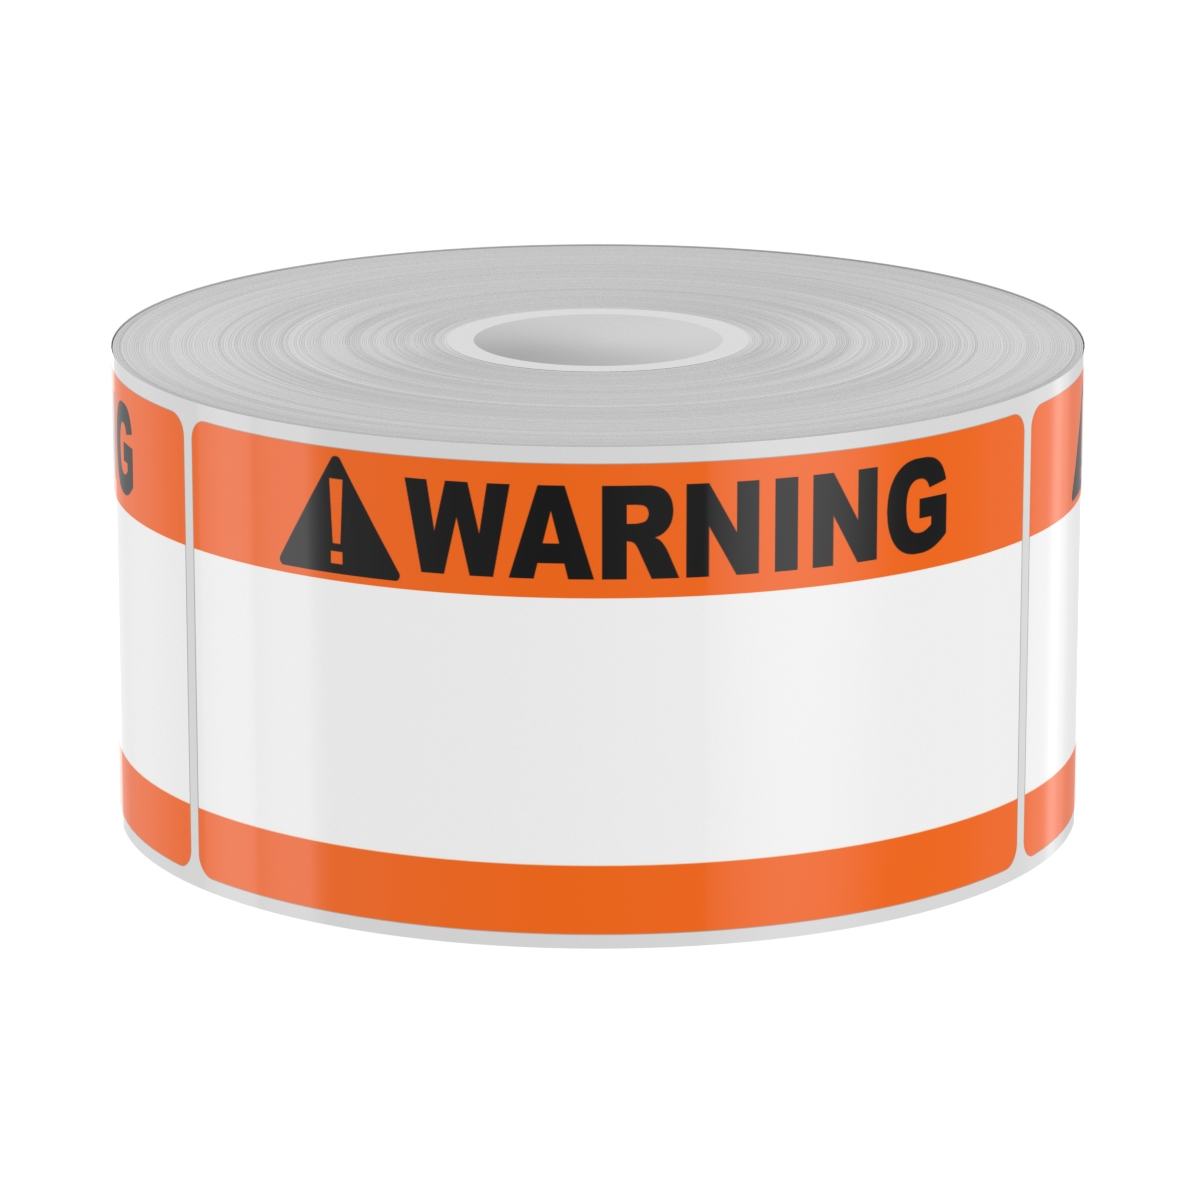 Ask a question about 250 2" x 4" High-Performance Orange Double Band with Black Warning